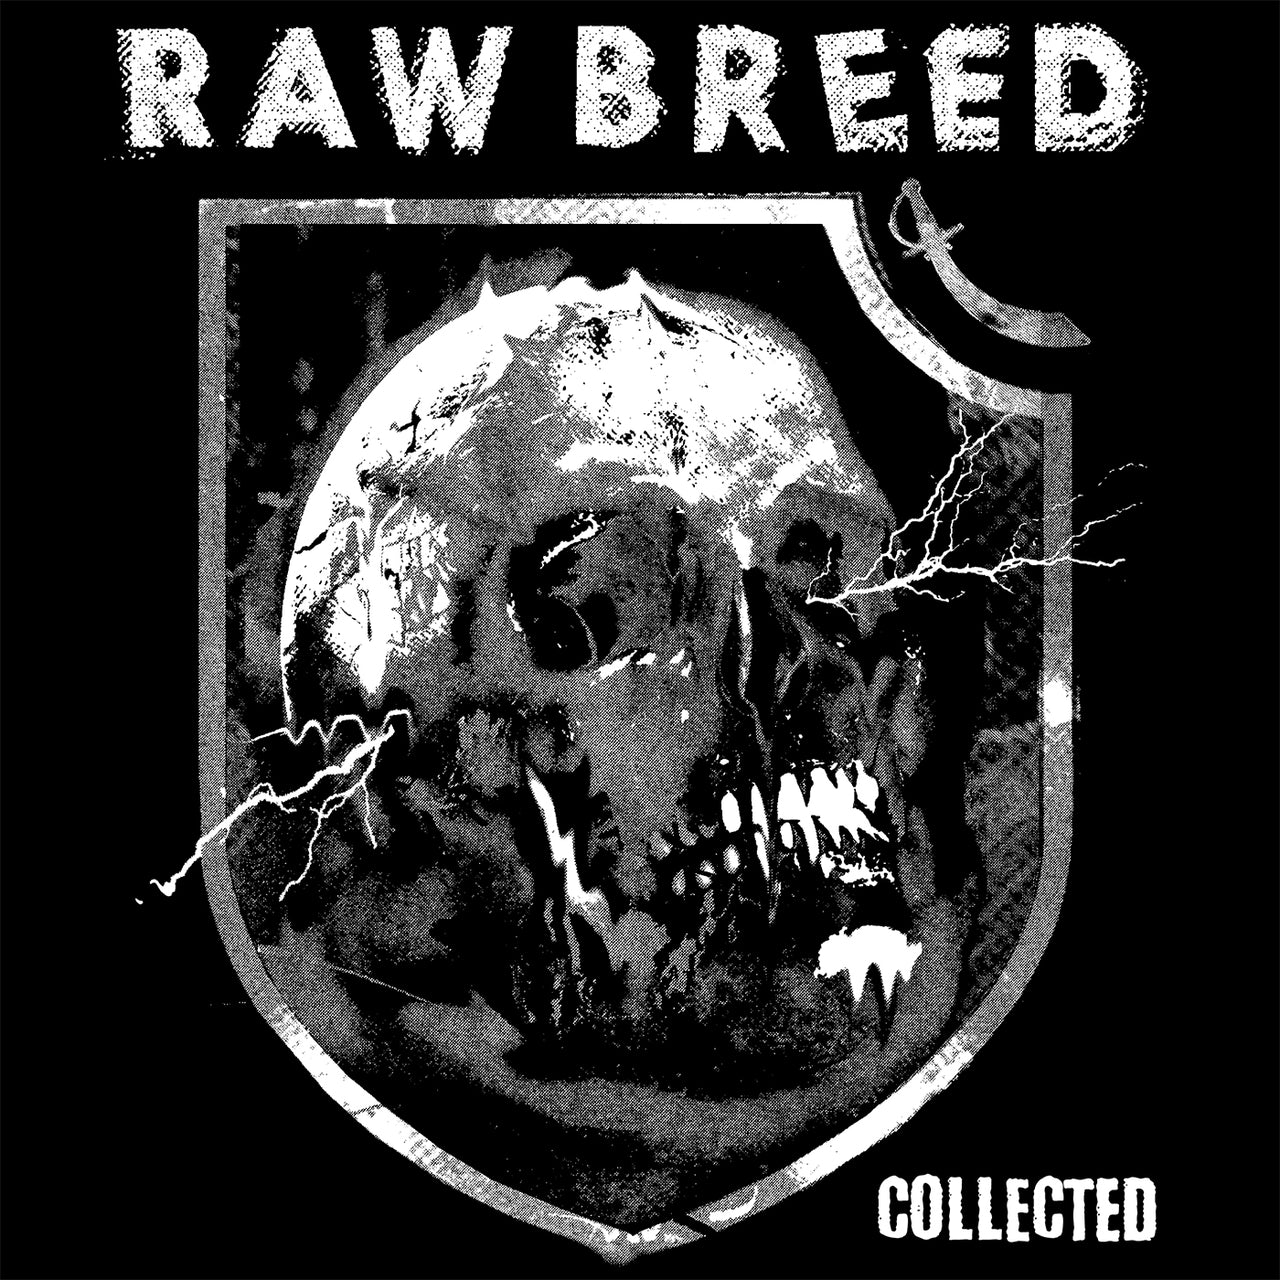 Raw Breed "Collected" 7" Vinyl